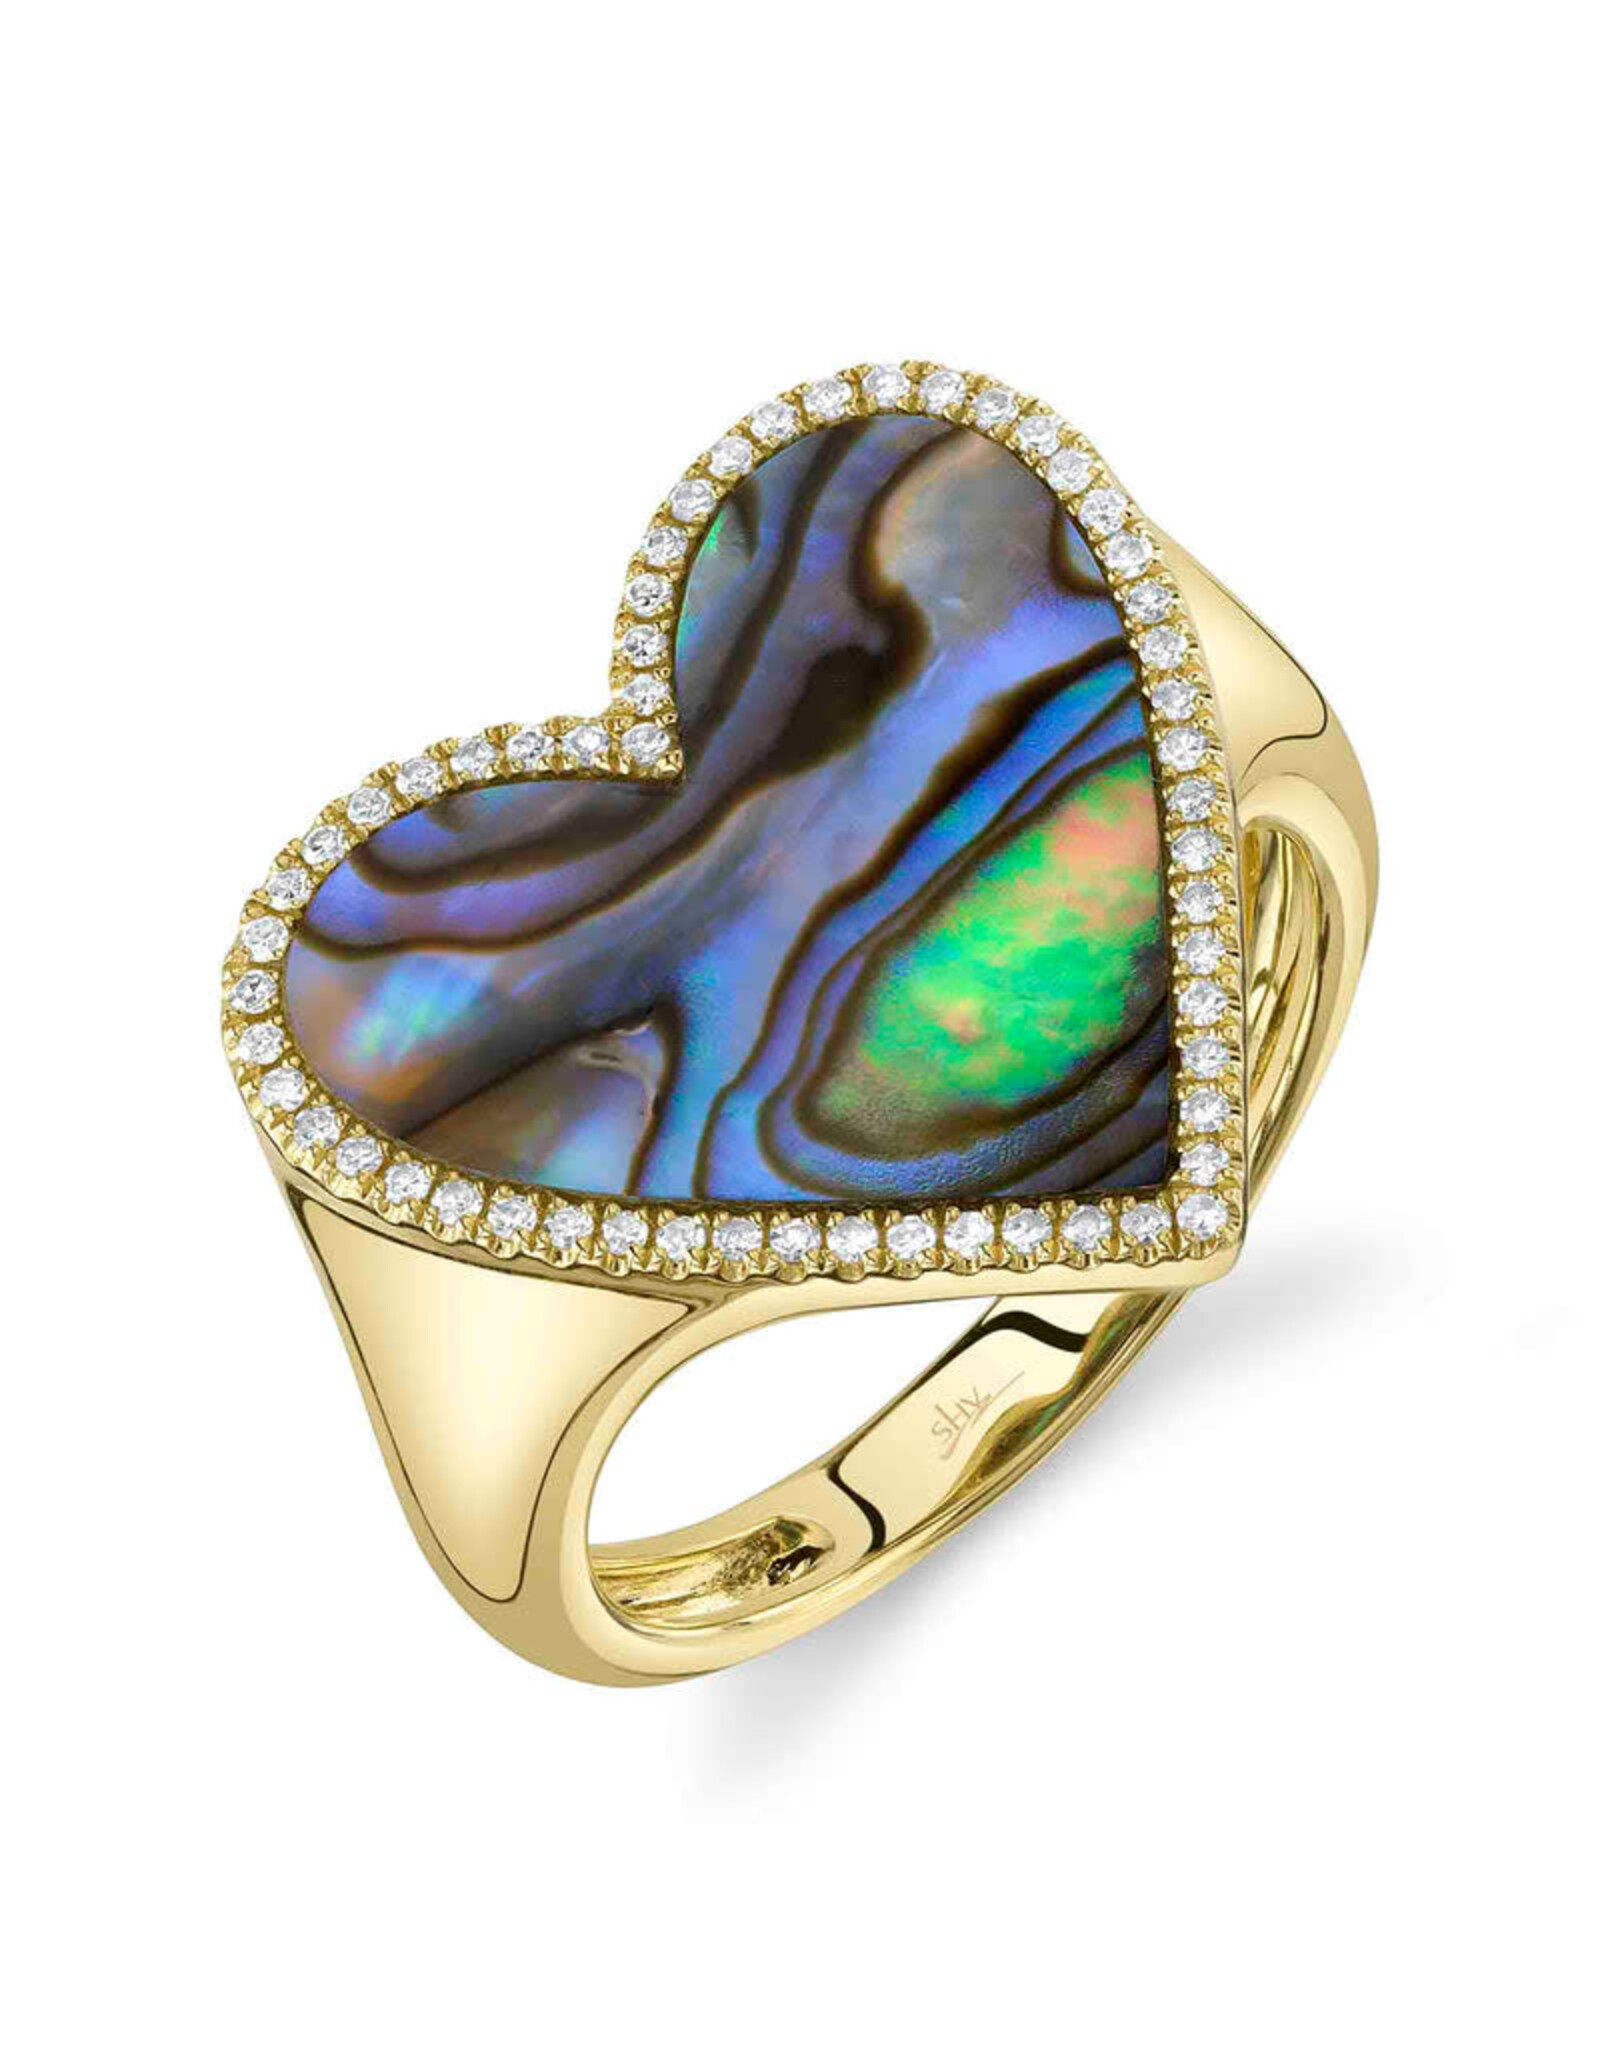 14K Yellow Gold Abalone and Diamond Heart Ring, AB: 1.83ct, D: 0.15ct